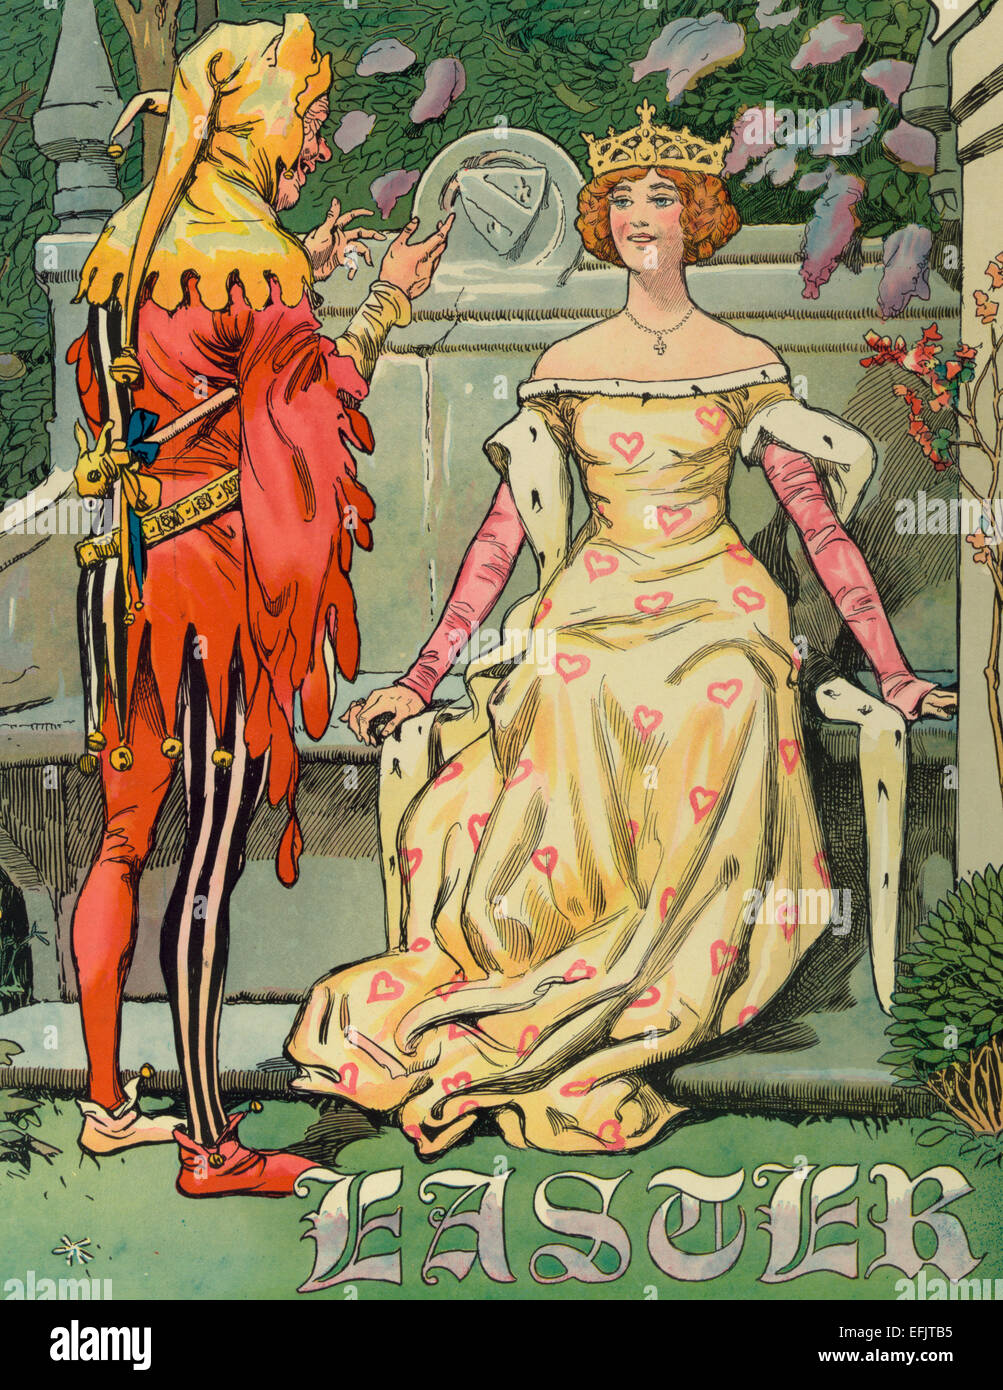 Illustration shows a court jester entertaining a young woman wearing a crown on her head, sitting on a large stone bench, circa 1906 Stock Photo